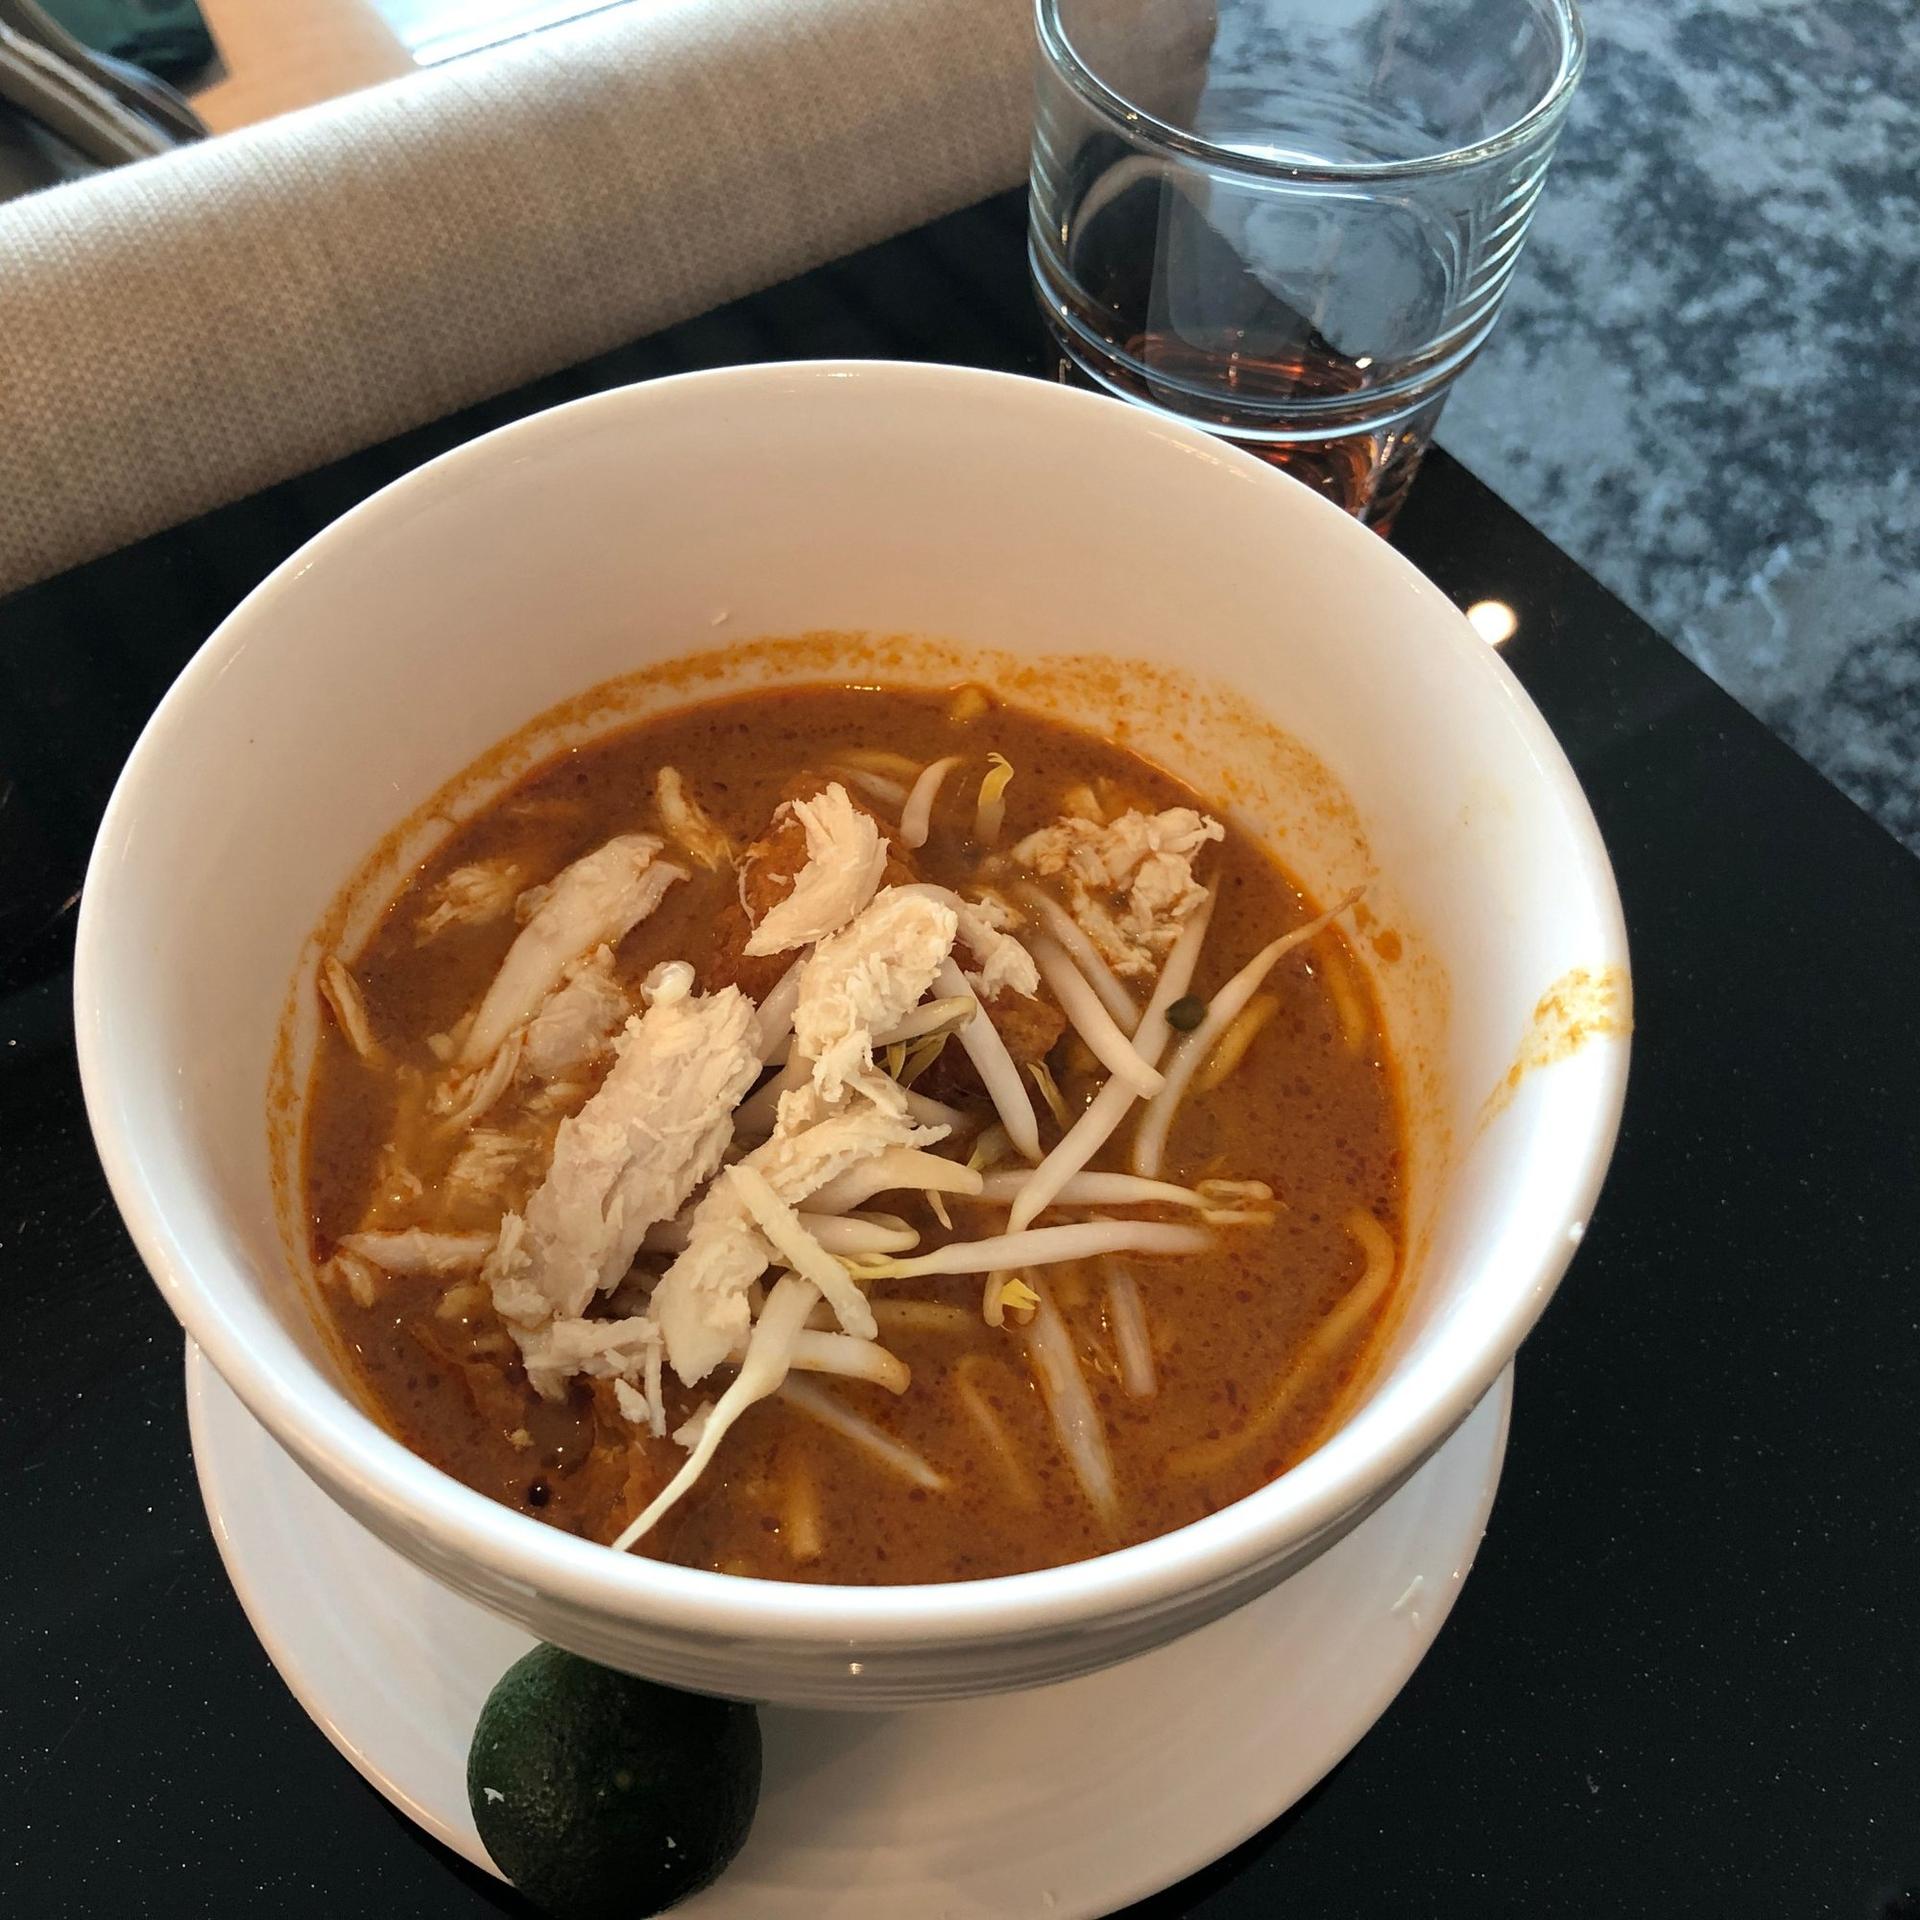 Malaysia Airlines Golden Business Class Lounge image 24 of 27